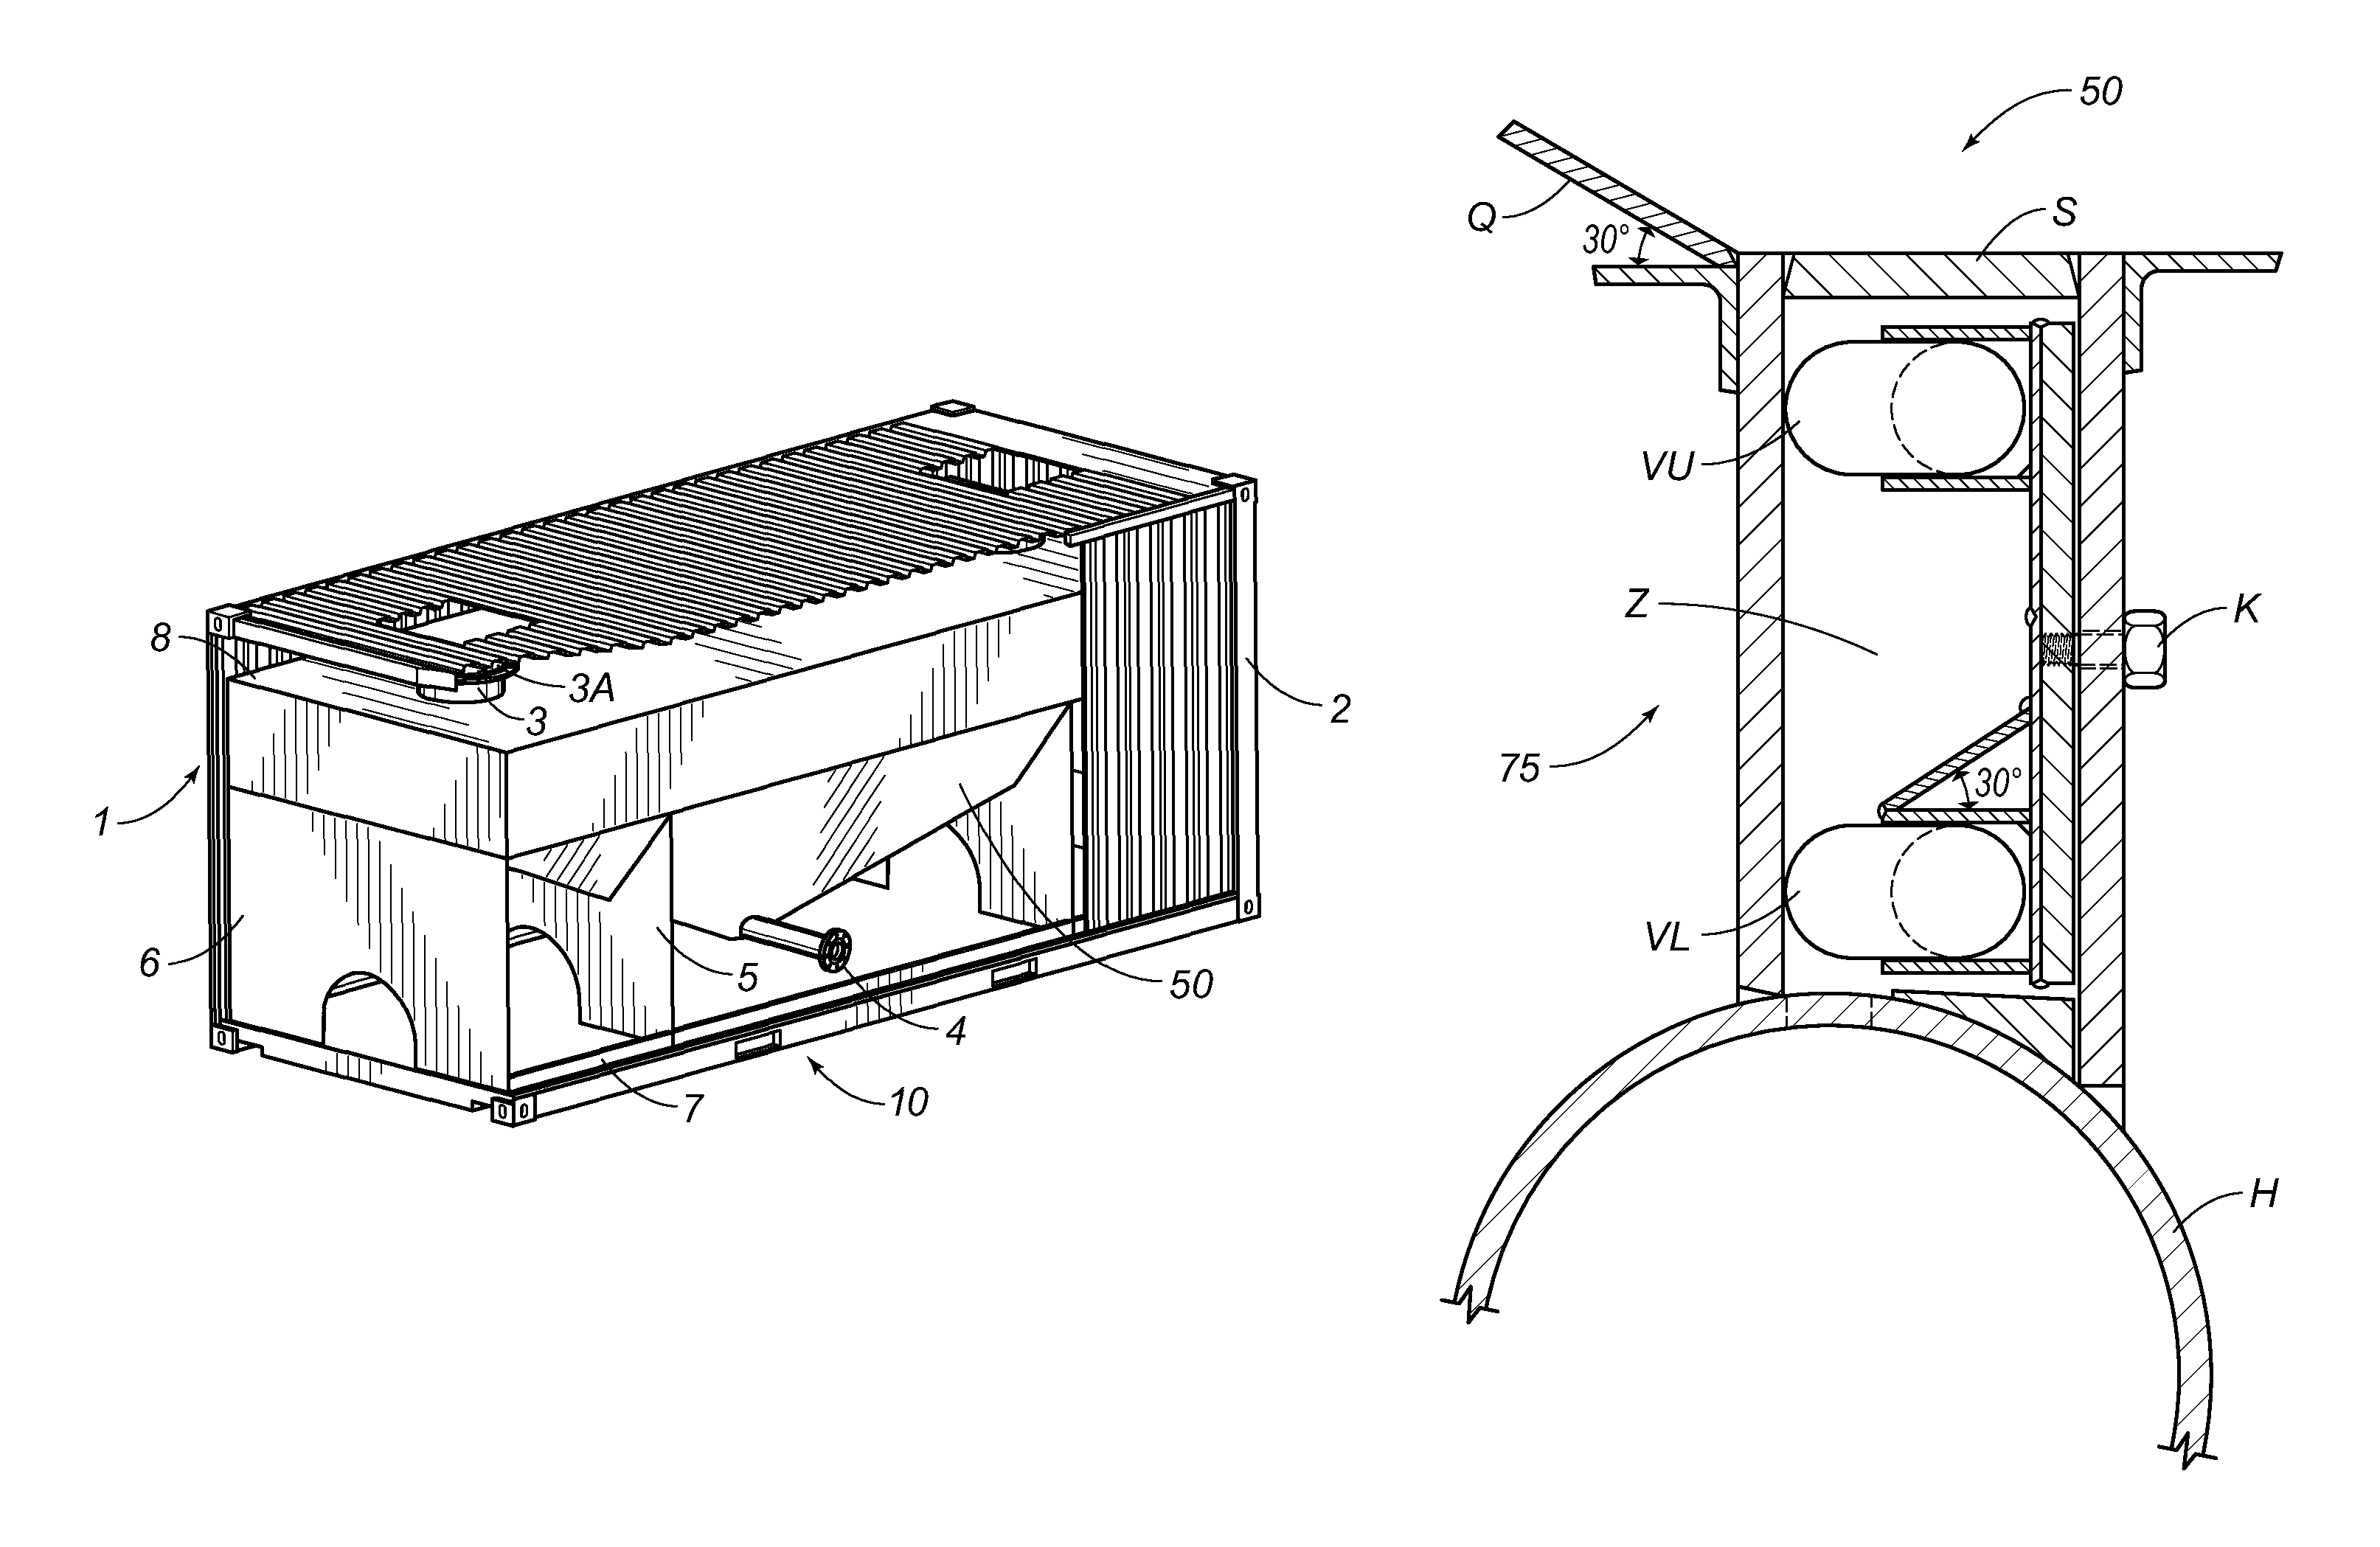 Apparatus for transporting frac sand in intermodal container